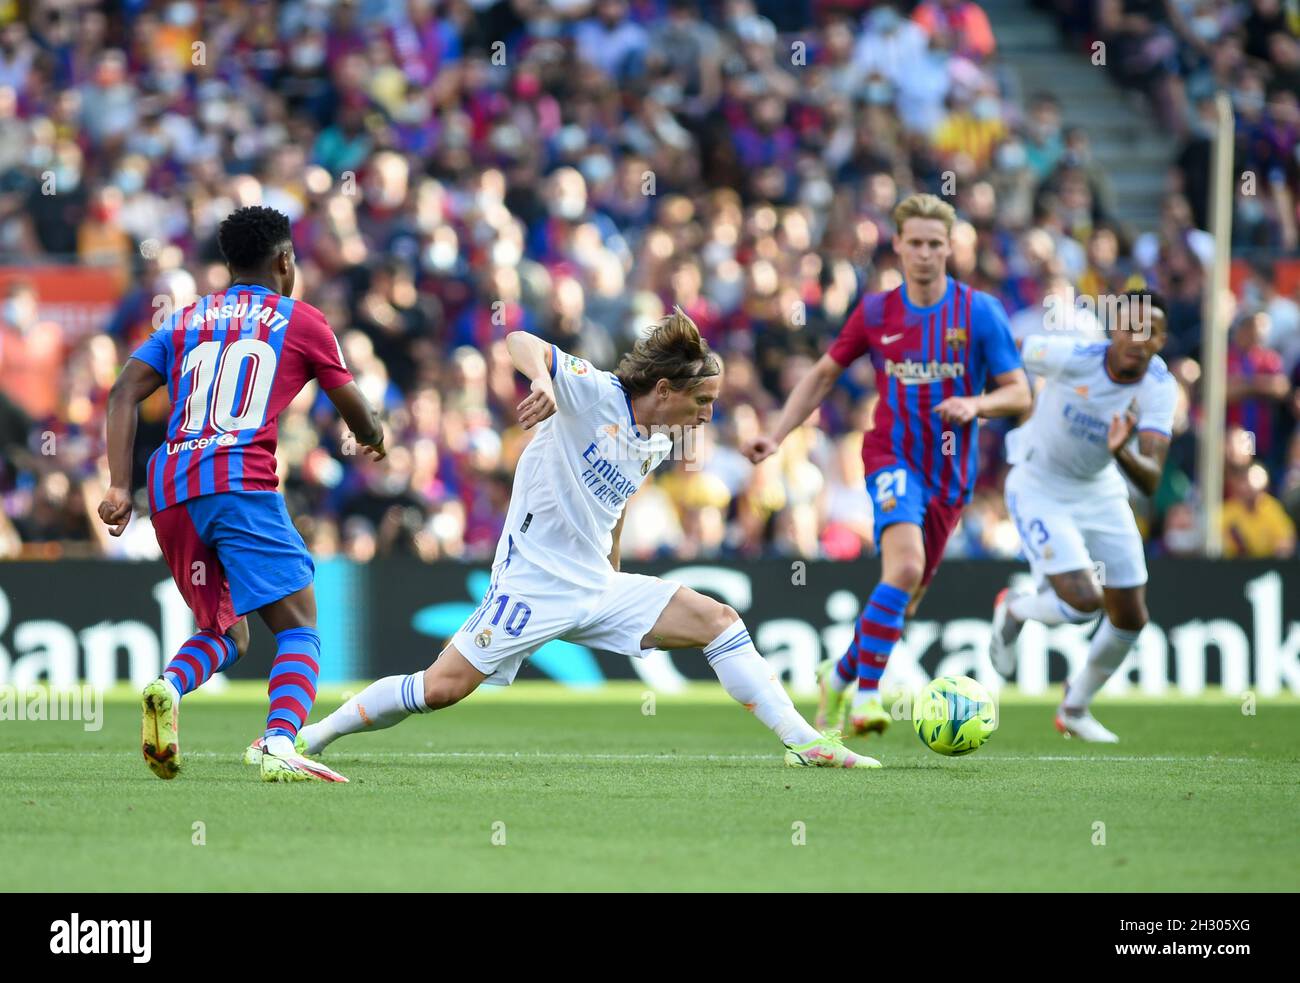 Barcelona, Spain. 24th Oct, 2021. Real Madrid's Luka Modric (C) competes  during a Spanish first division league football match between FC Barcelona  and Real Madrid in Barcelona, Spain, on Oct. 24, 2021.